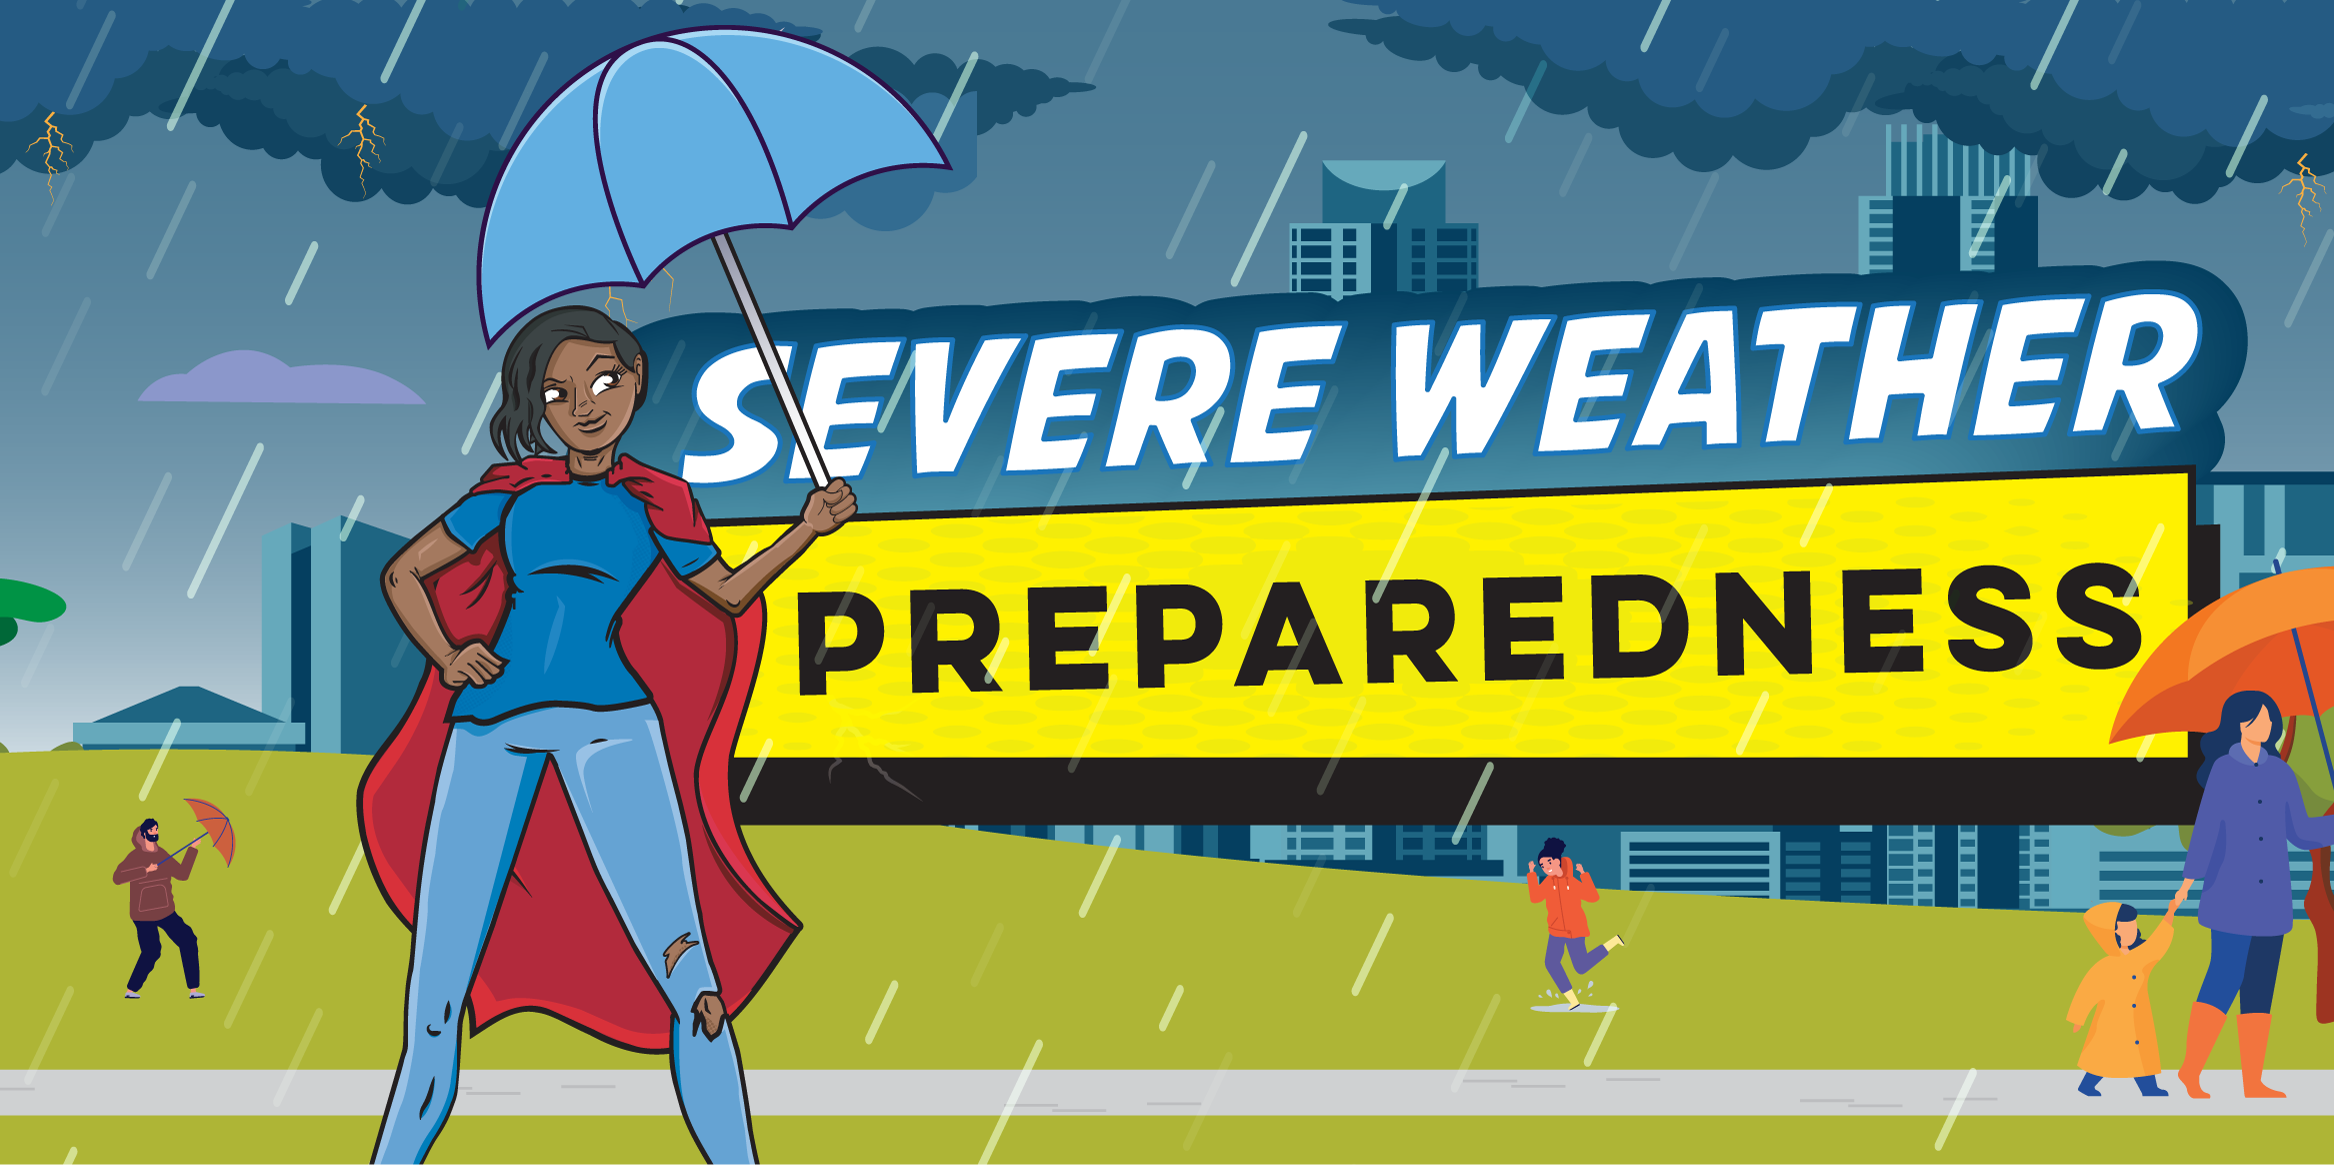 comic book style illustration with female superhero wearing t-shirt and blue jeans with a red cape and holding an umbrella in a rain storm. Text on image: Severe Weather Preparedness